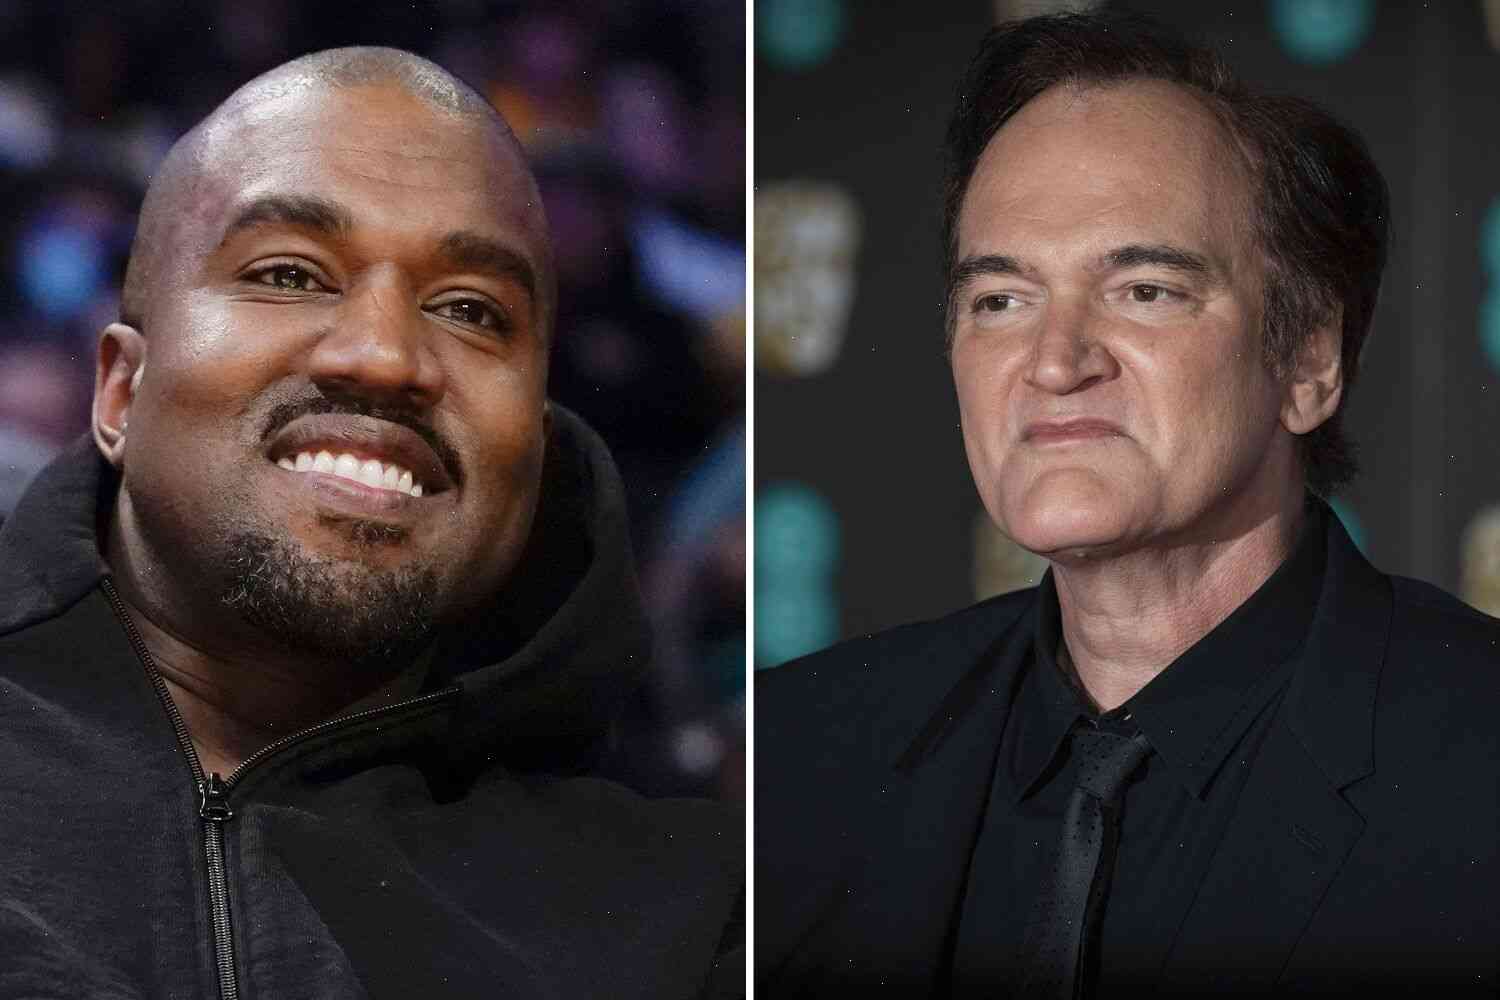 Quentin Tarantino defends his screenplay, saying he never gave it to Kanye West